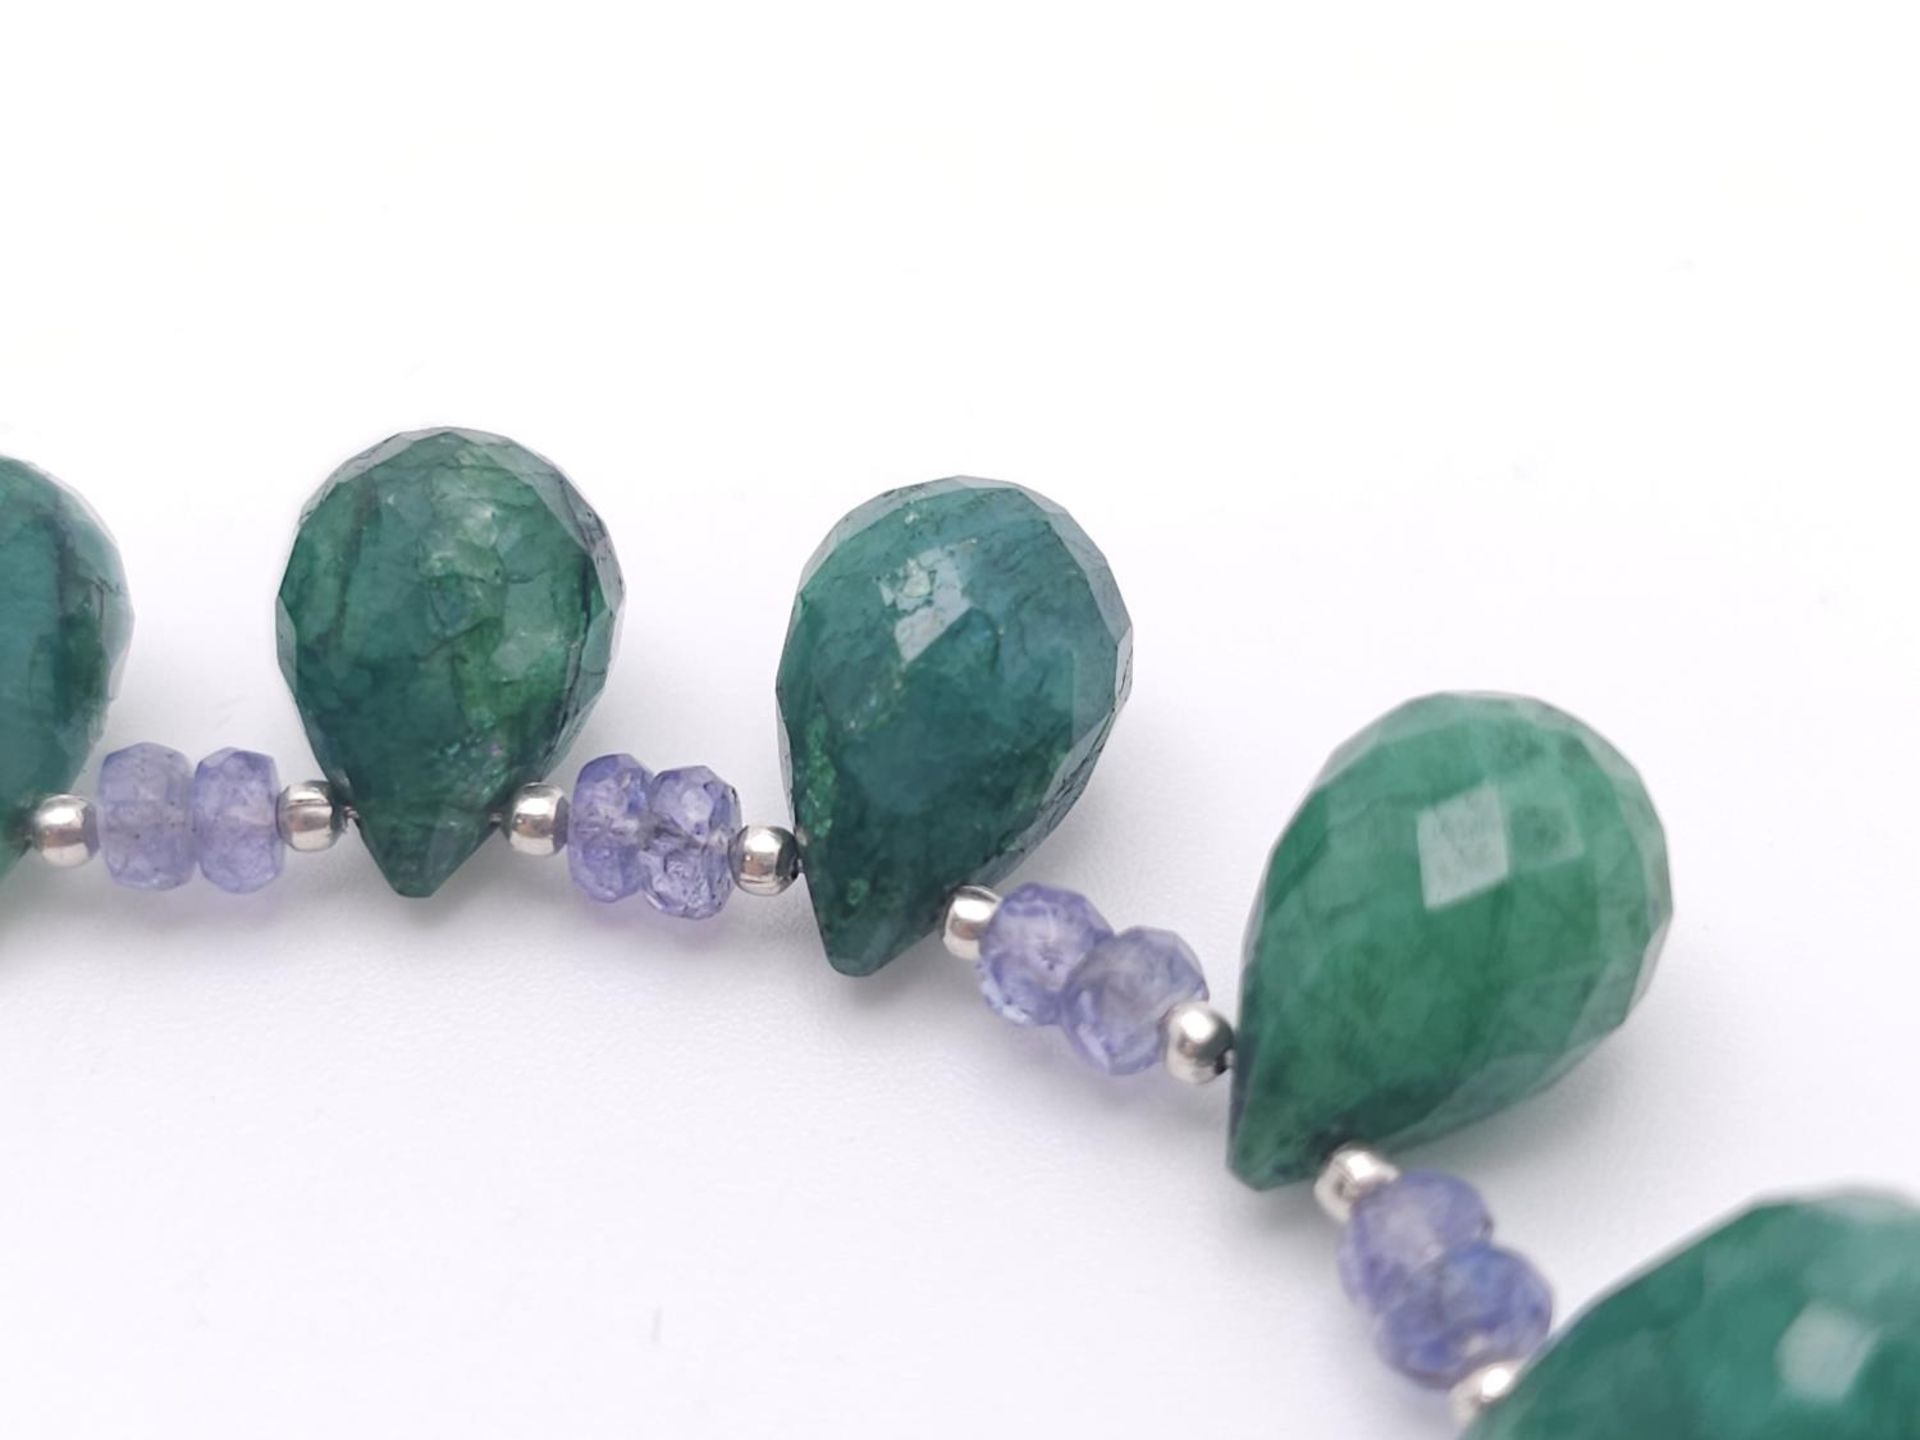 A 125ctw Tanzanite Gemstone Single Strand Necklace with Emerald Drops. 925 Silver Clasp. 42cm. - Image 2 of 4